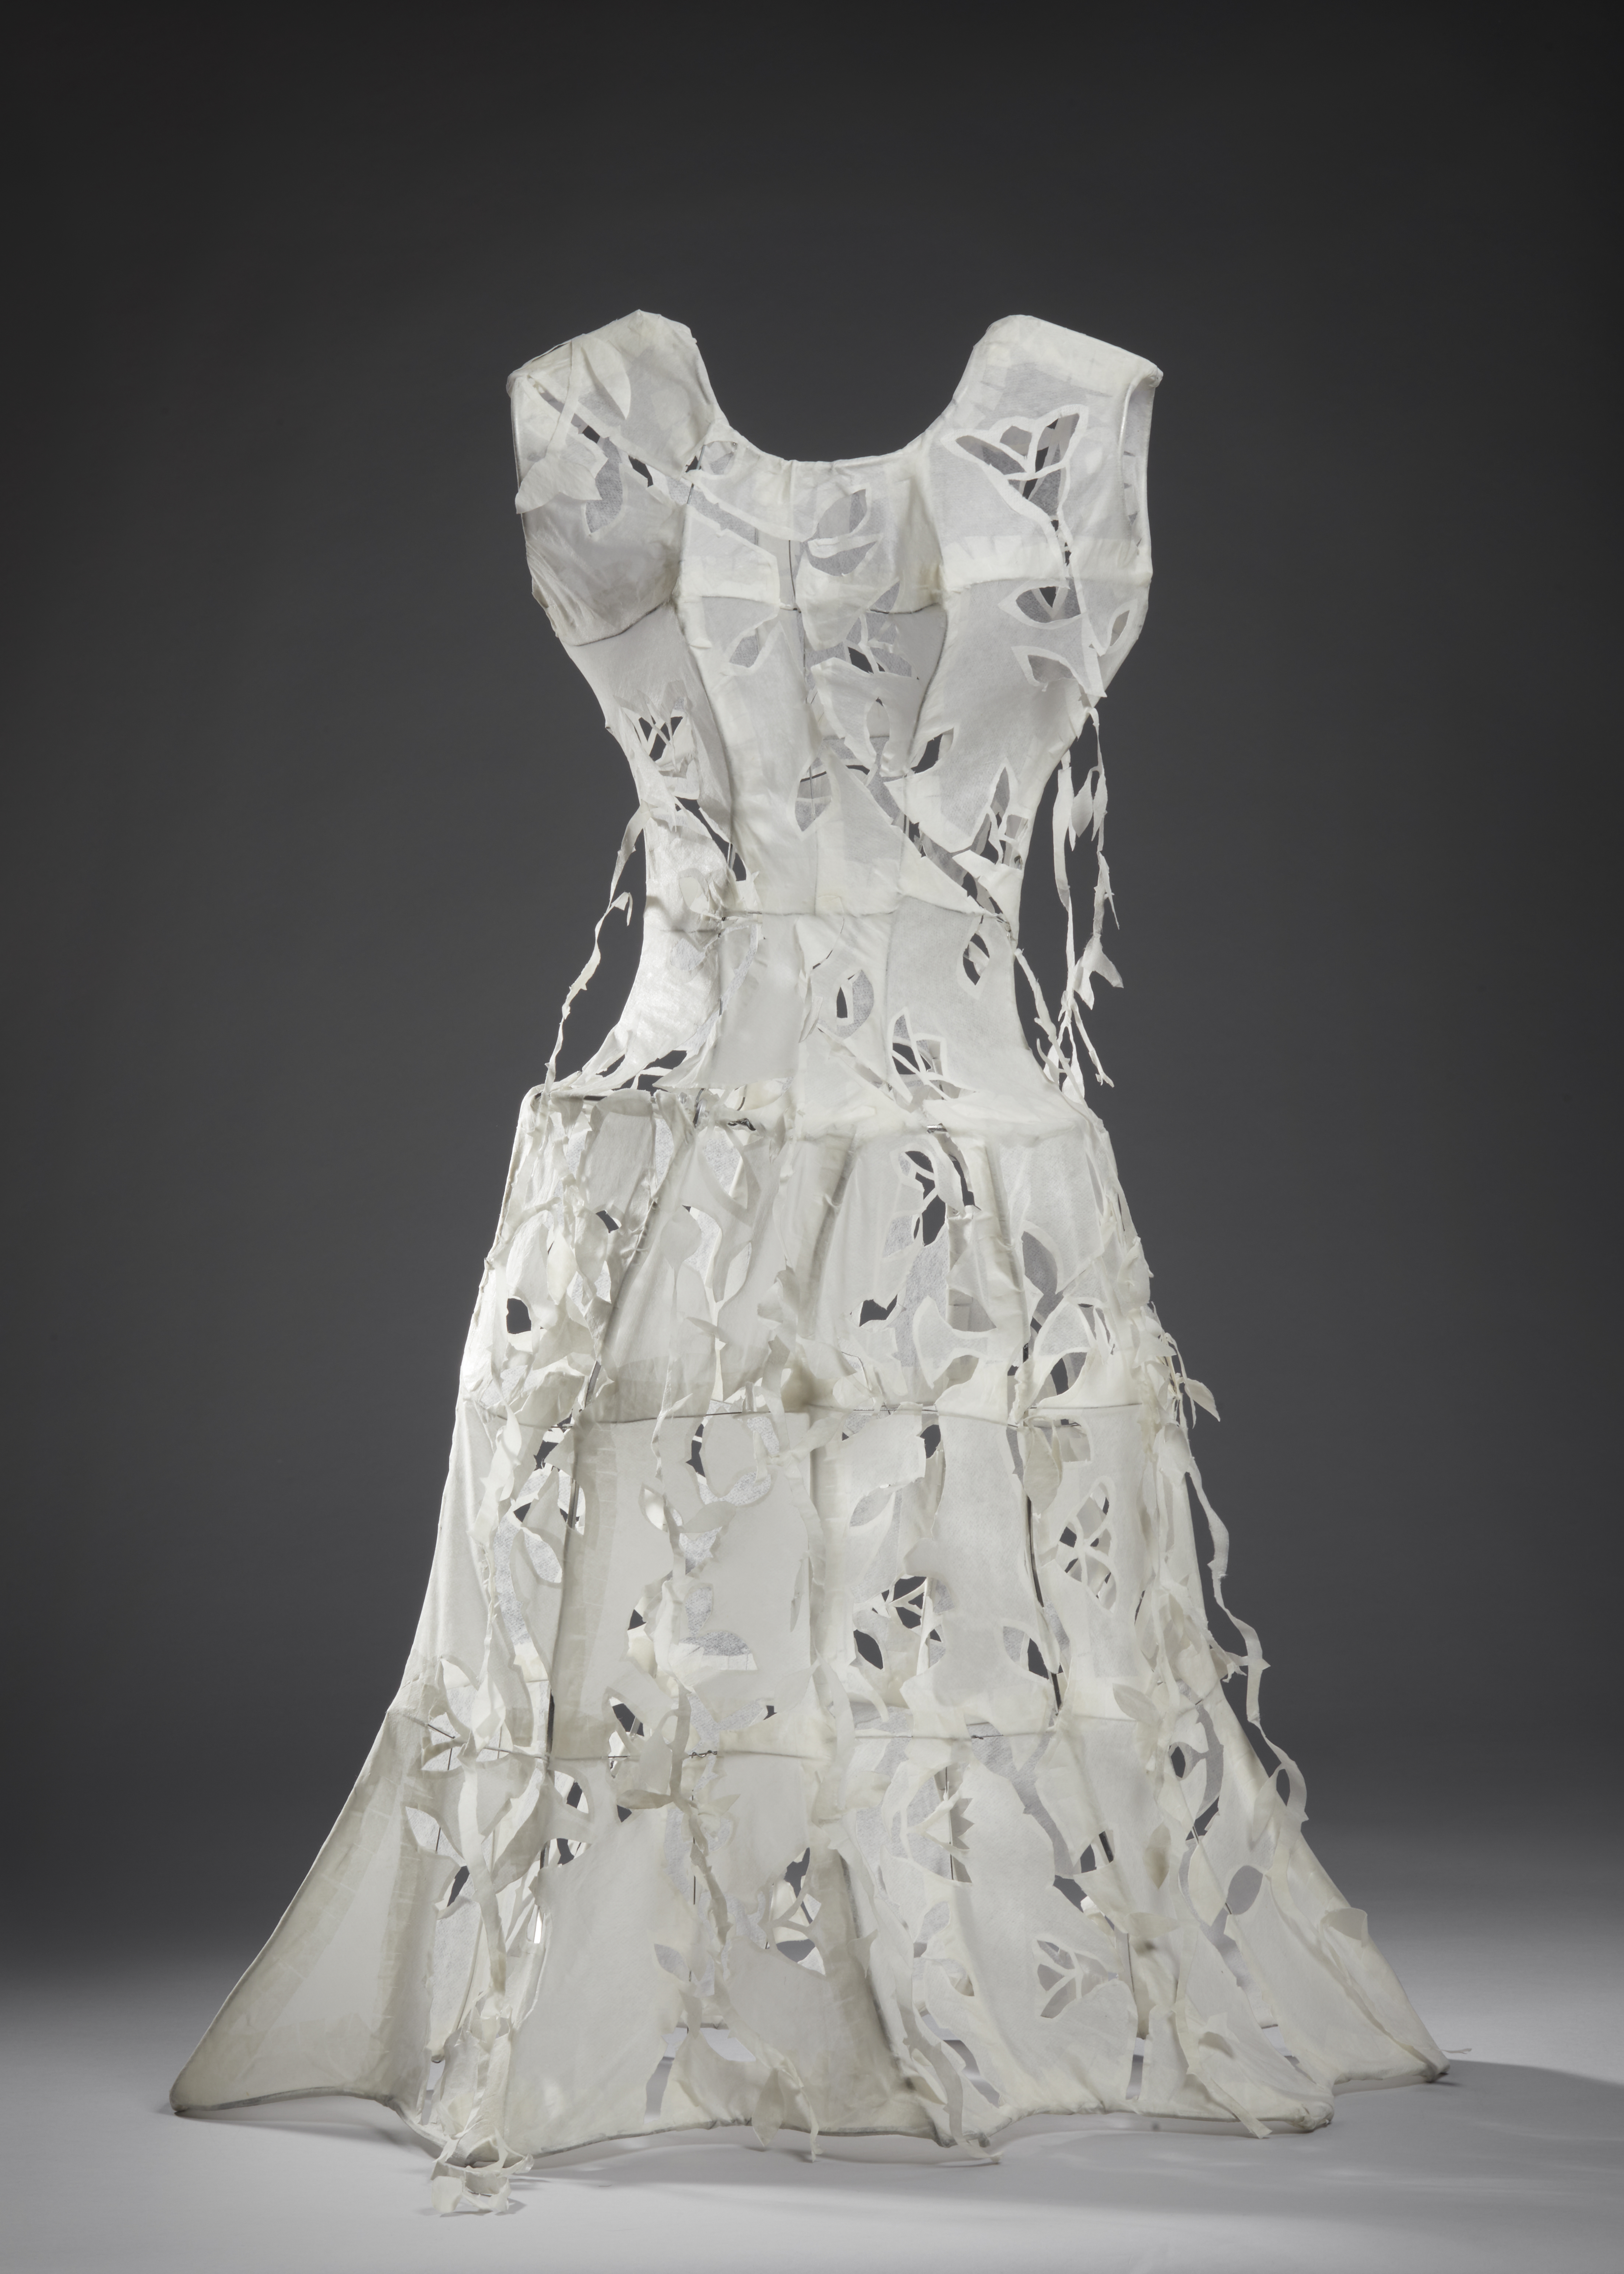 Cut-out Roses Dress (2003-04)